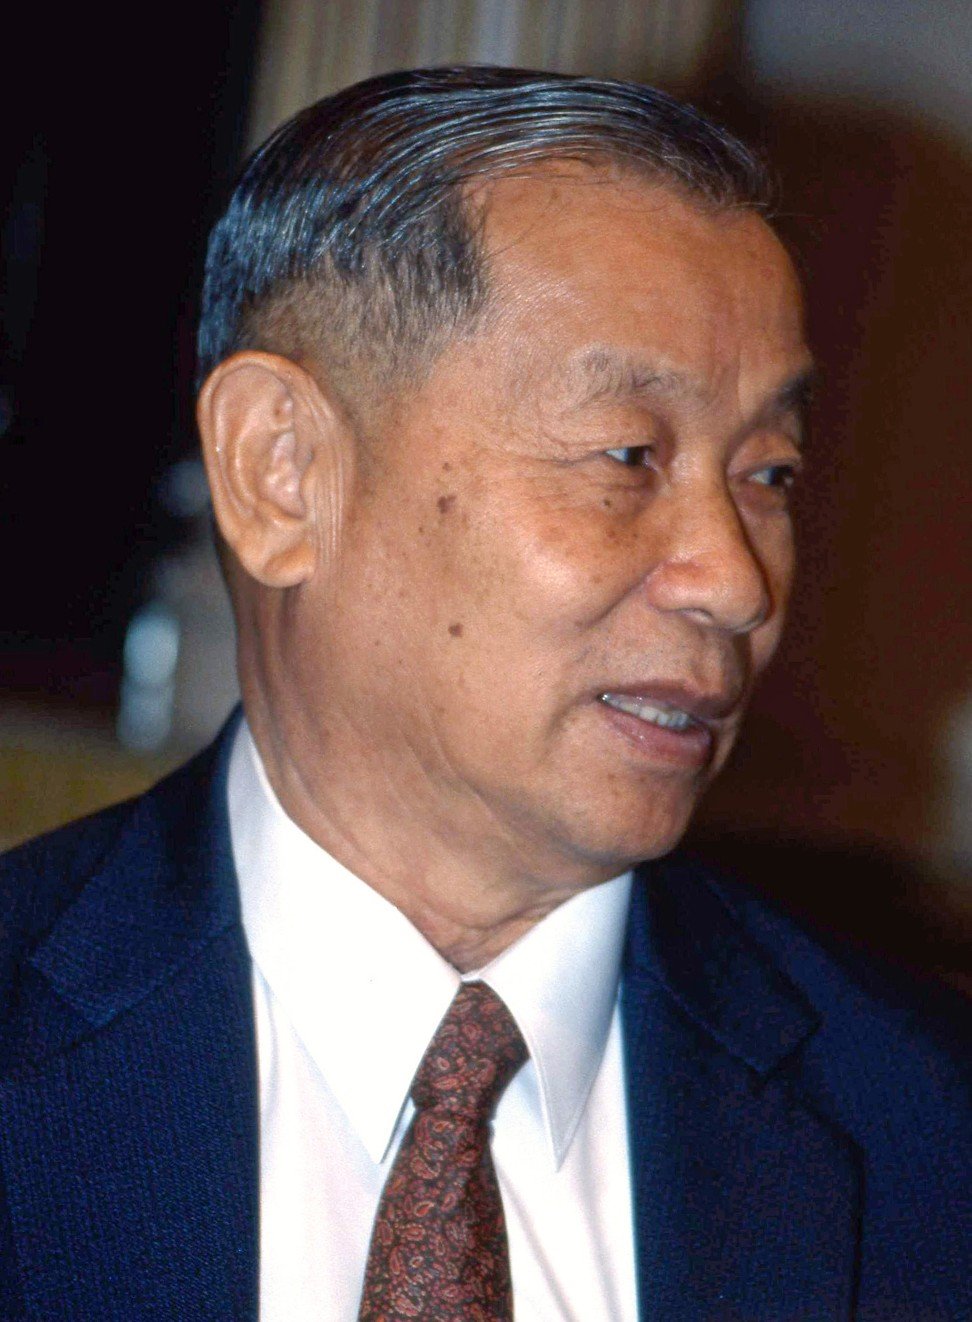 An undated photo of Thai billionaire Chaleo Yoovidhya, who died of natural causes at age 89 on March 17, 2012. Photo: AP